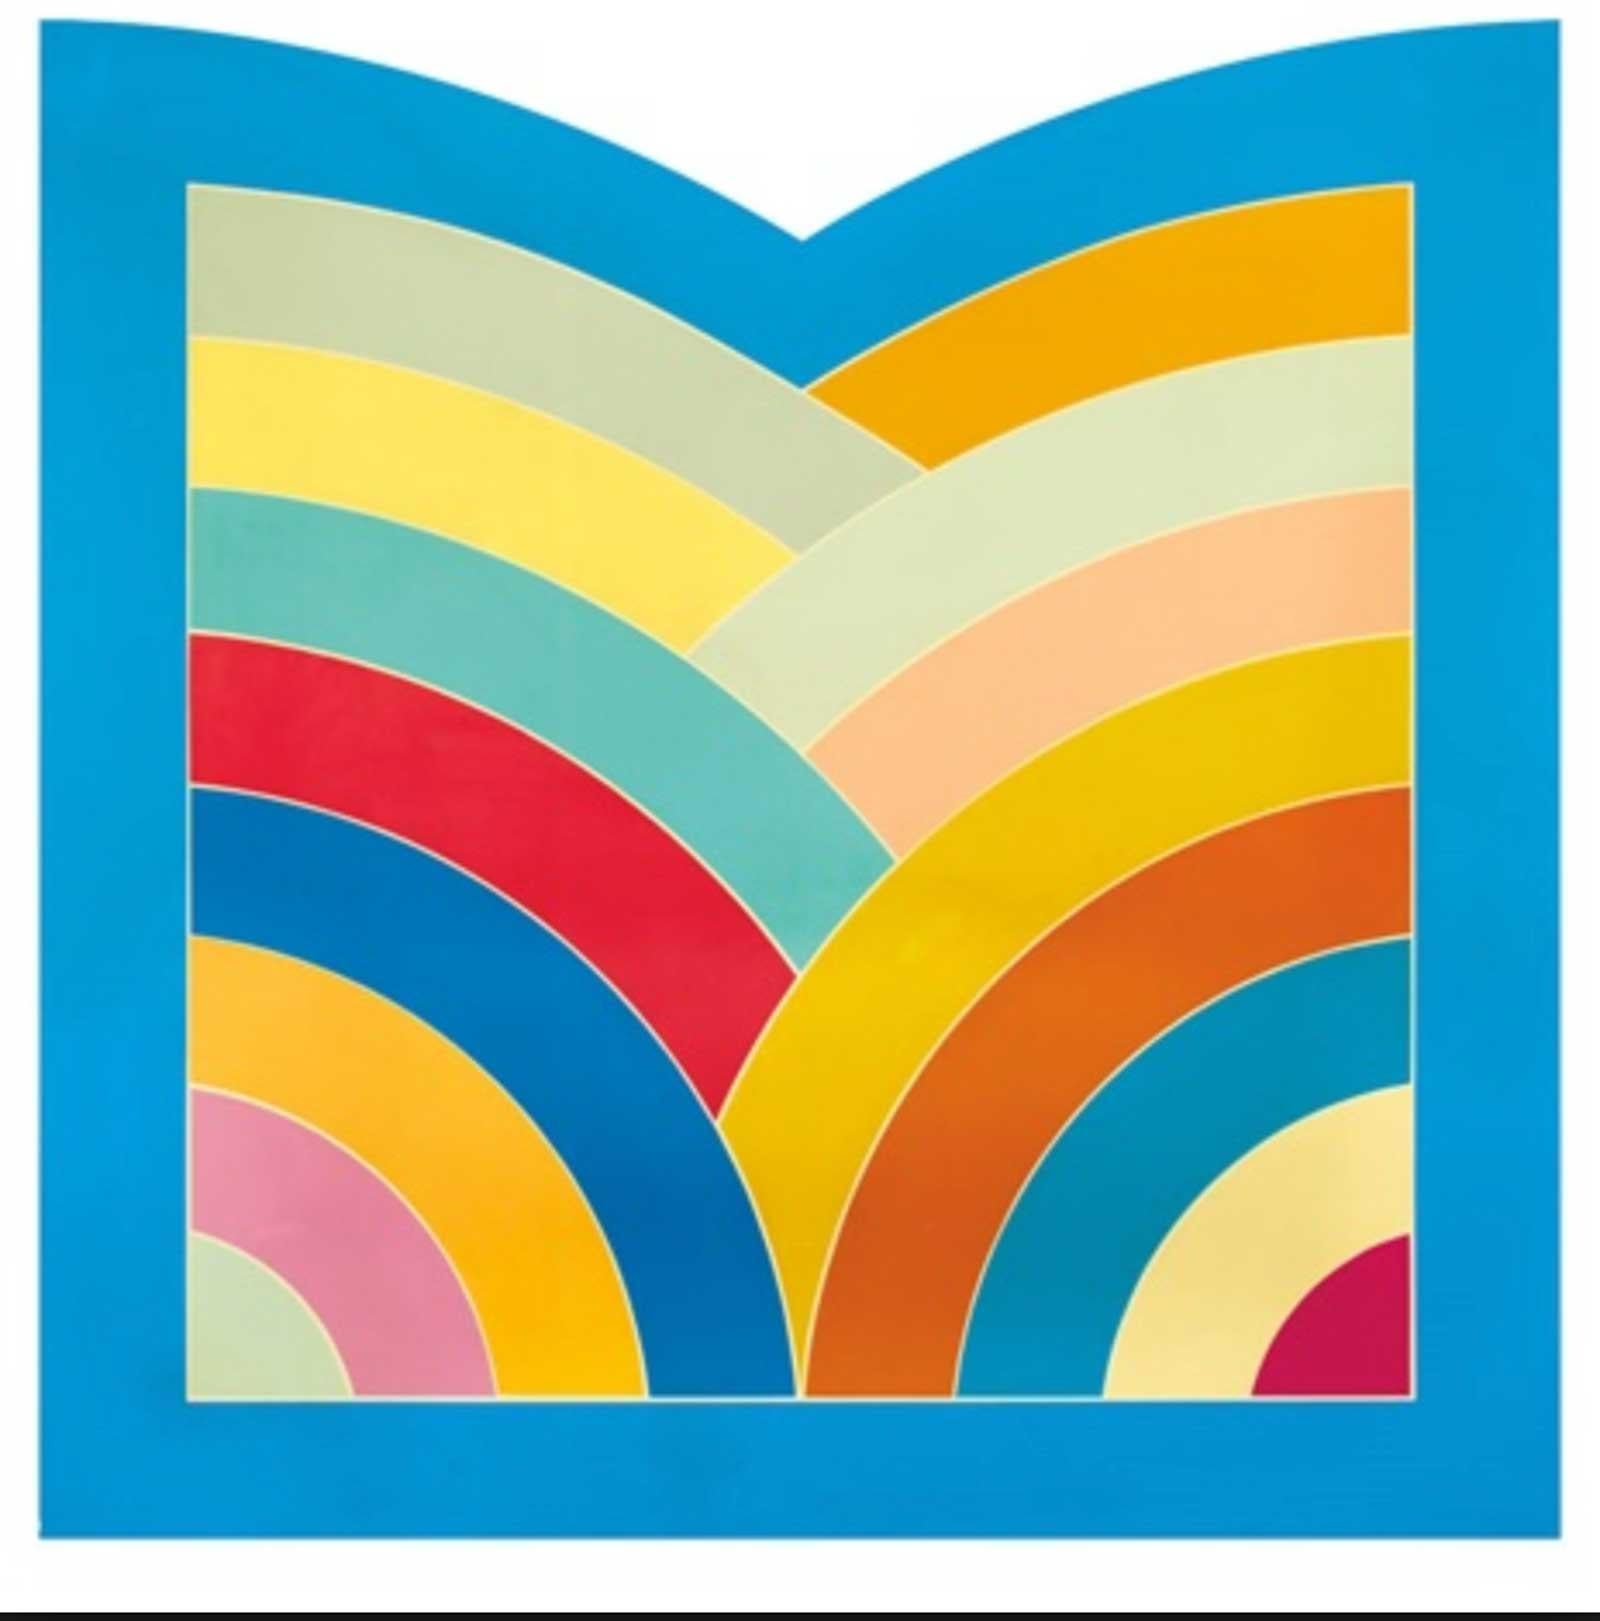 Large Painting on Board in Style of Frank Stella's Award Winning MOMA Logo For Sale 9